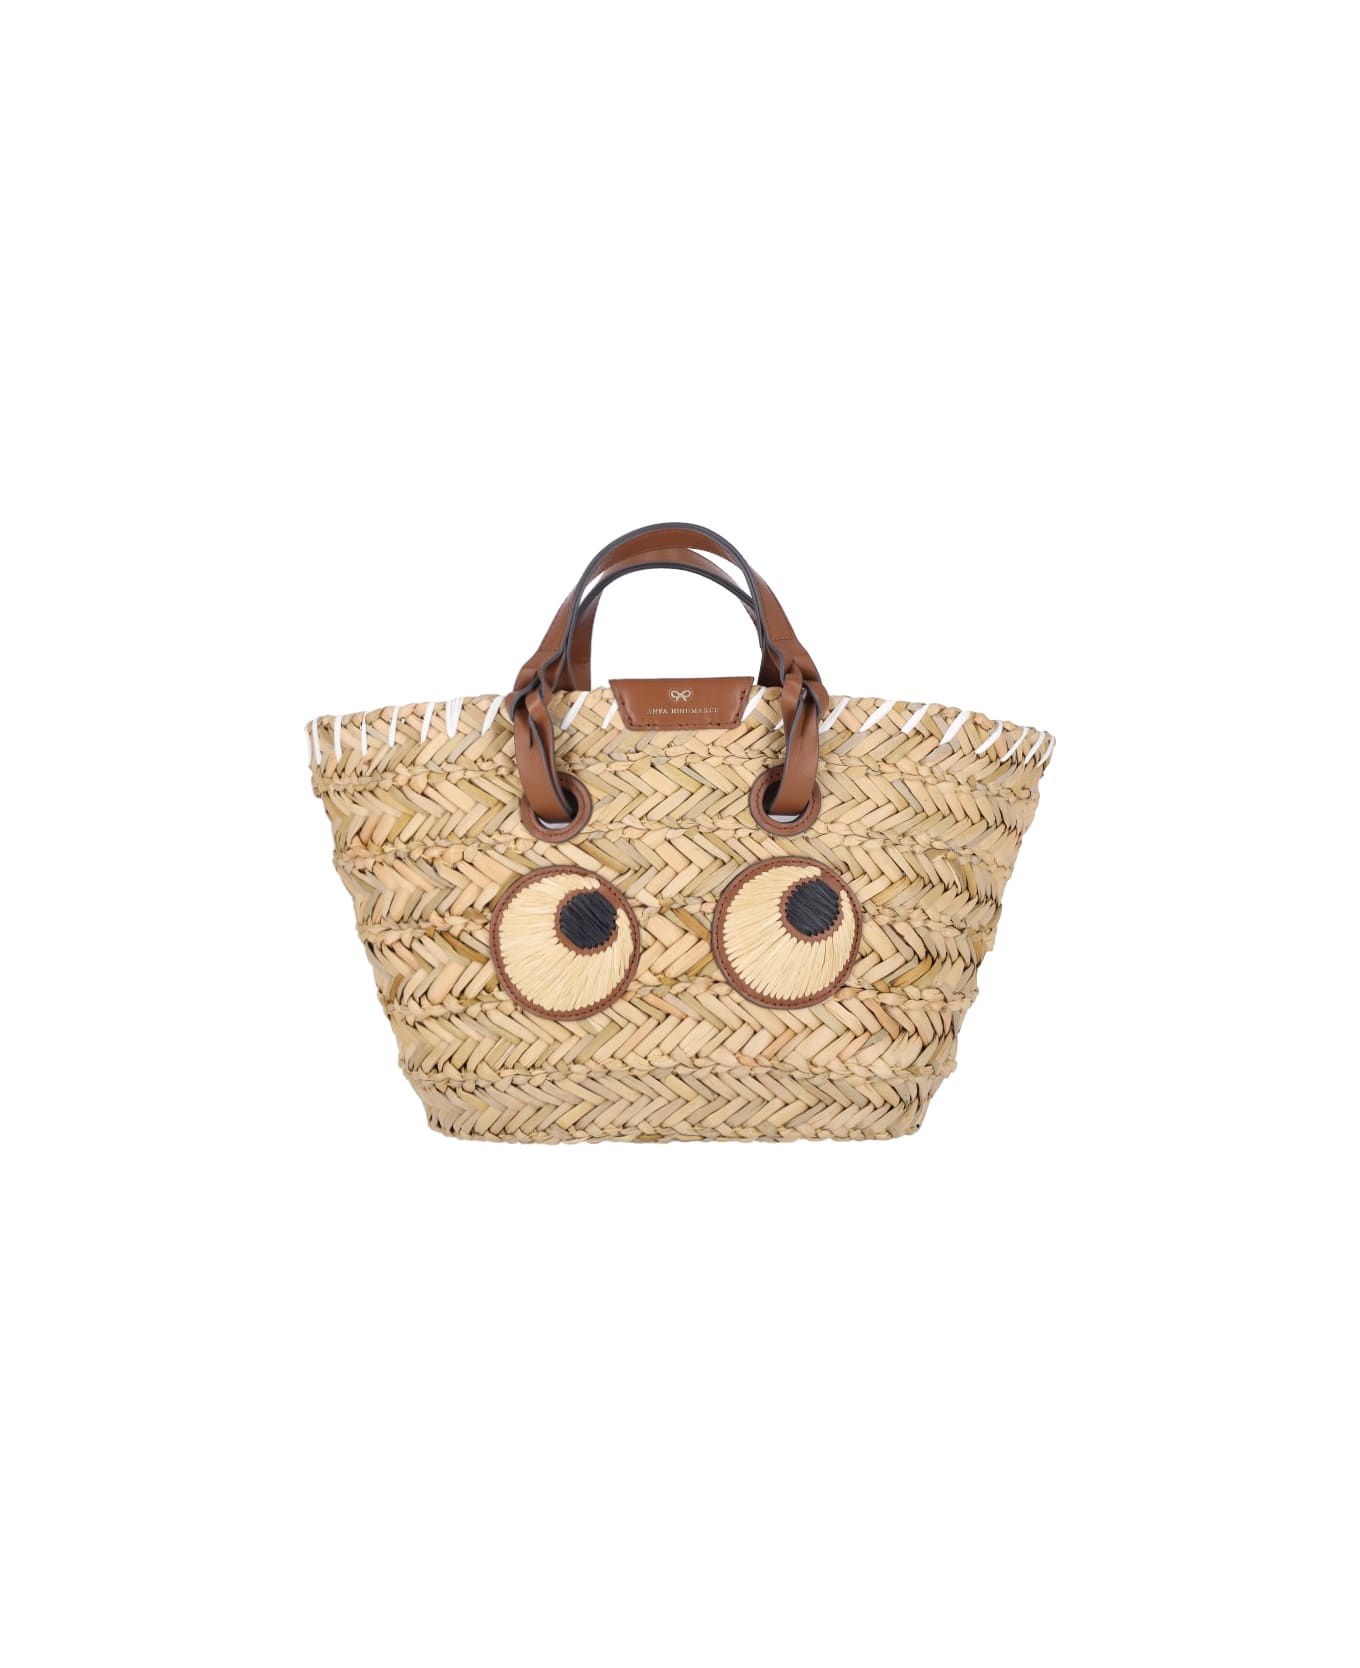 Anya Hindmarch 'eyes' Small Tote Bag - Beige トートバッグ